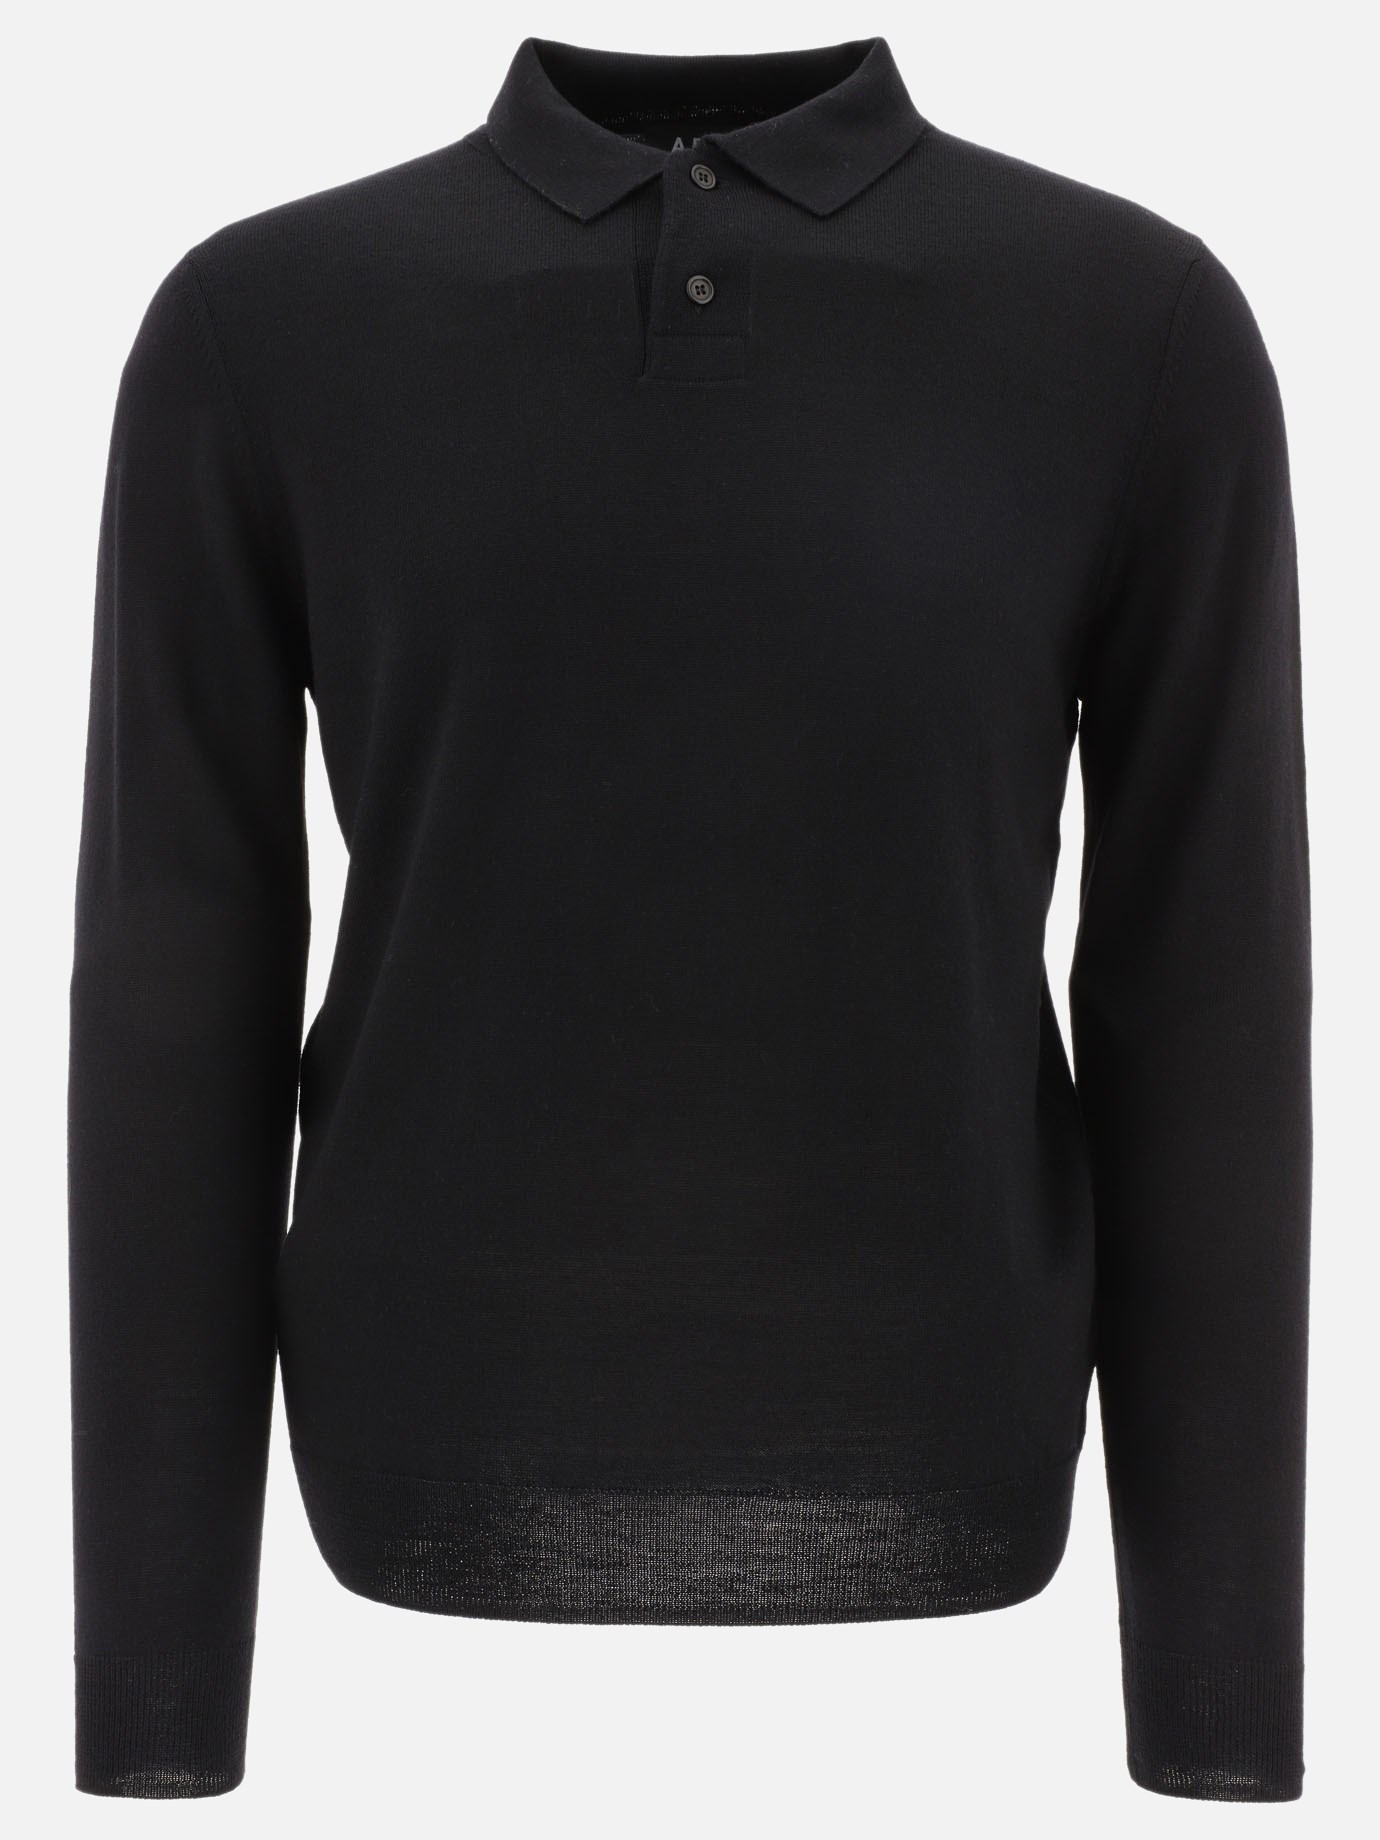 Maglione  Jerry by A.P.C. - 3